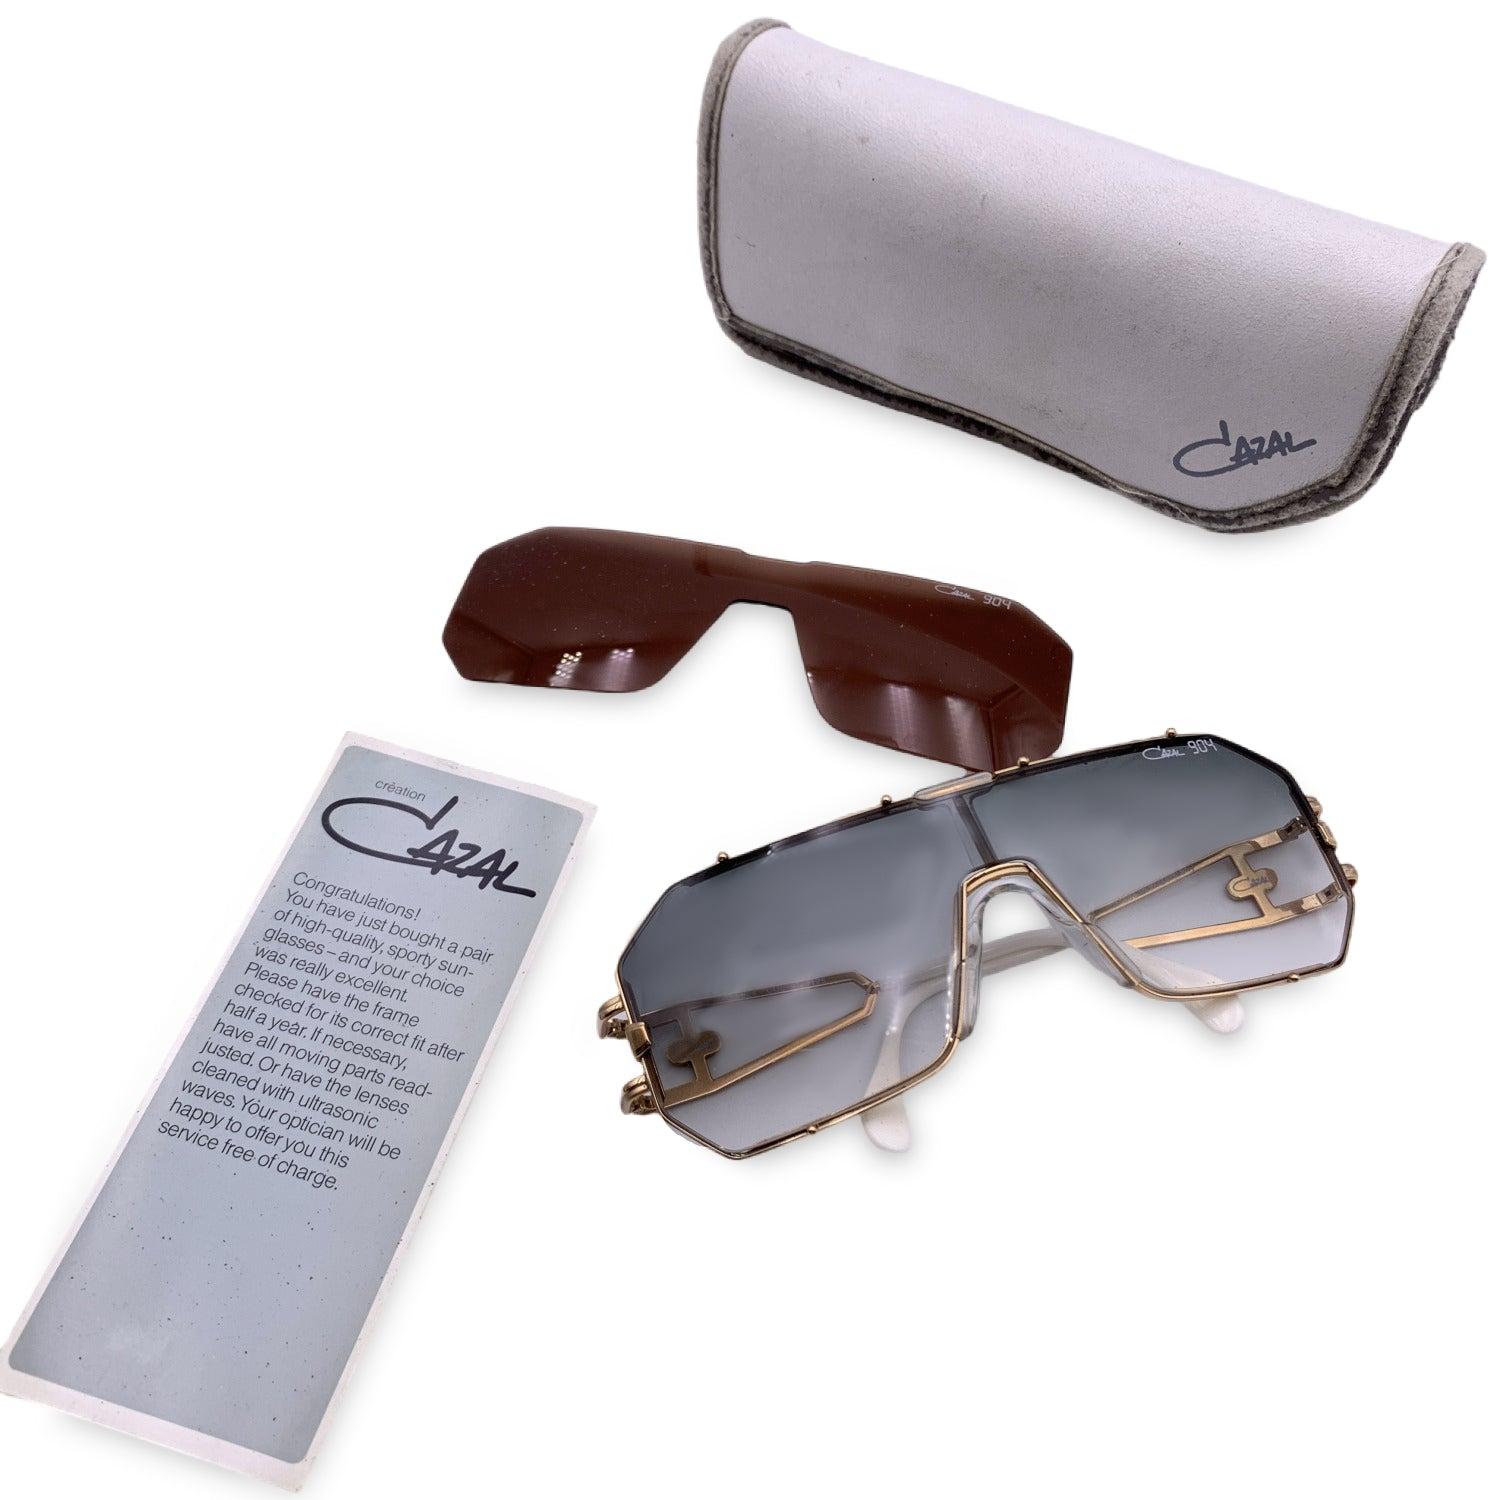 Beautiful sunglasses by Cazal, Mod. 904 Col. 97. Shield frame. Gradient one piece lens in grey color. This model has an interchangeable lens system (brown lens included). Gold metal frame. Cazal logo on temples. Made in W.Germany. Condition A+ -